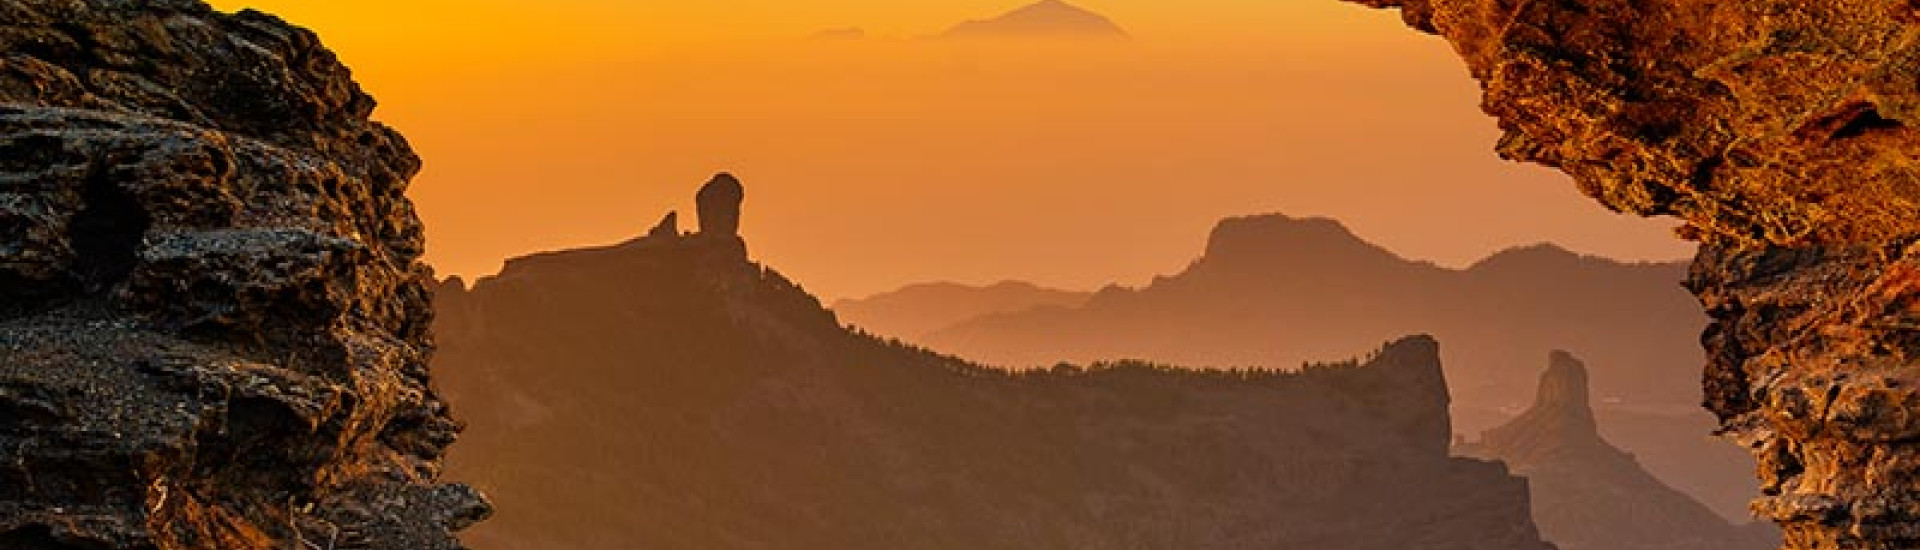 Discover Gran Canaria: 14 plans for free on the island